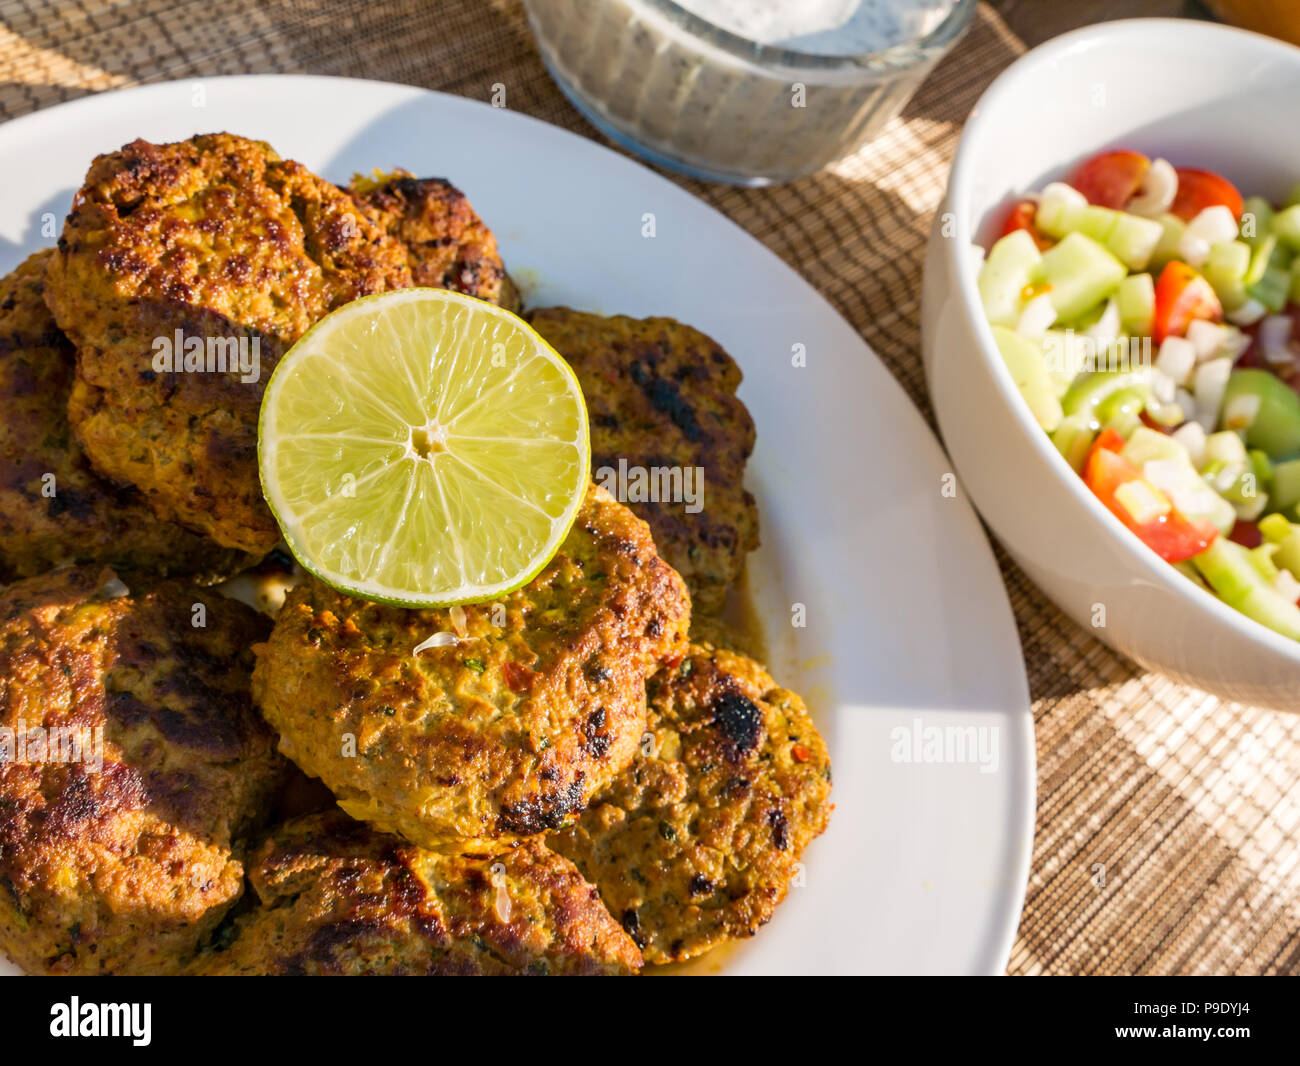 MIddle Eastern food with lamb patty kebabs with half a lime, cucumber and tomato salad and yoghurt herb dressing Stock Photo